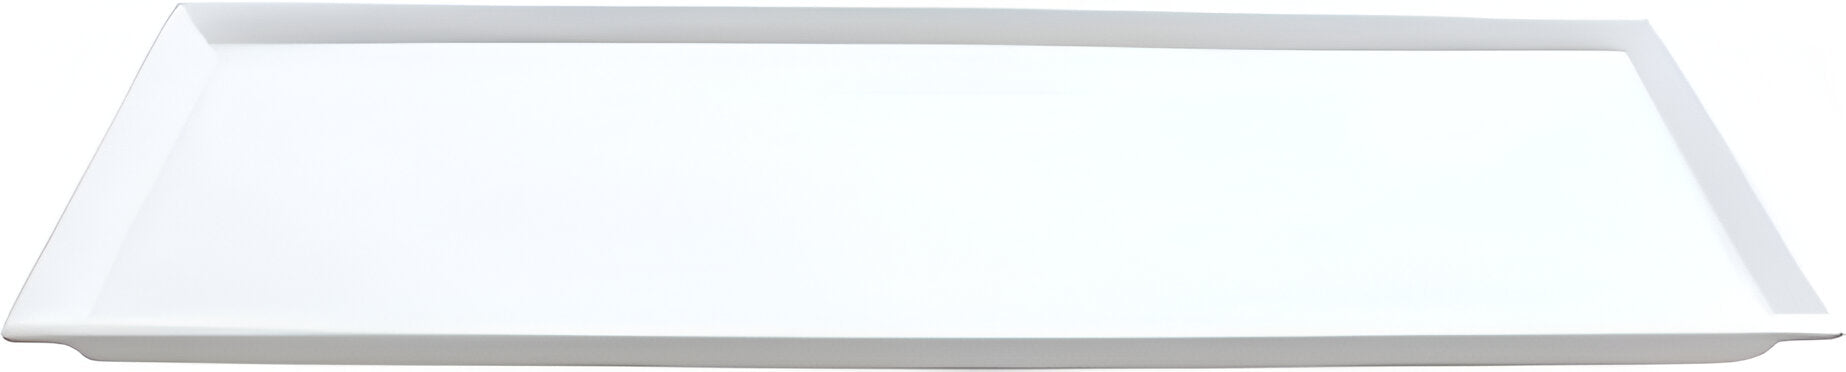 Bugambilia - Mod 6.75" White Rectangular Serving Plate With Lid Cover - LCIH1/6-MOD-WW